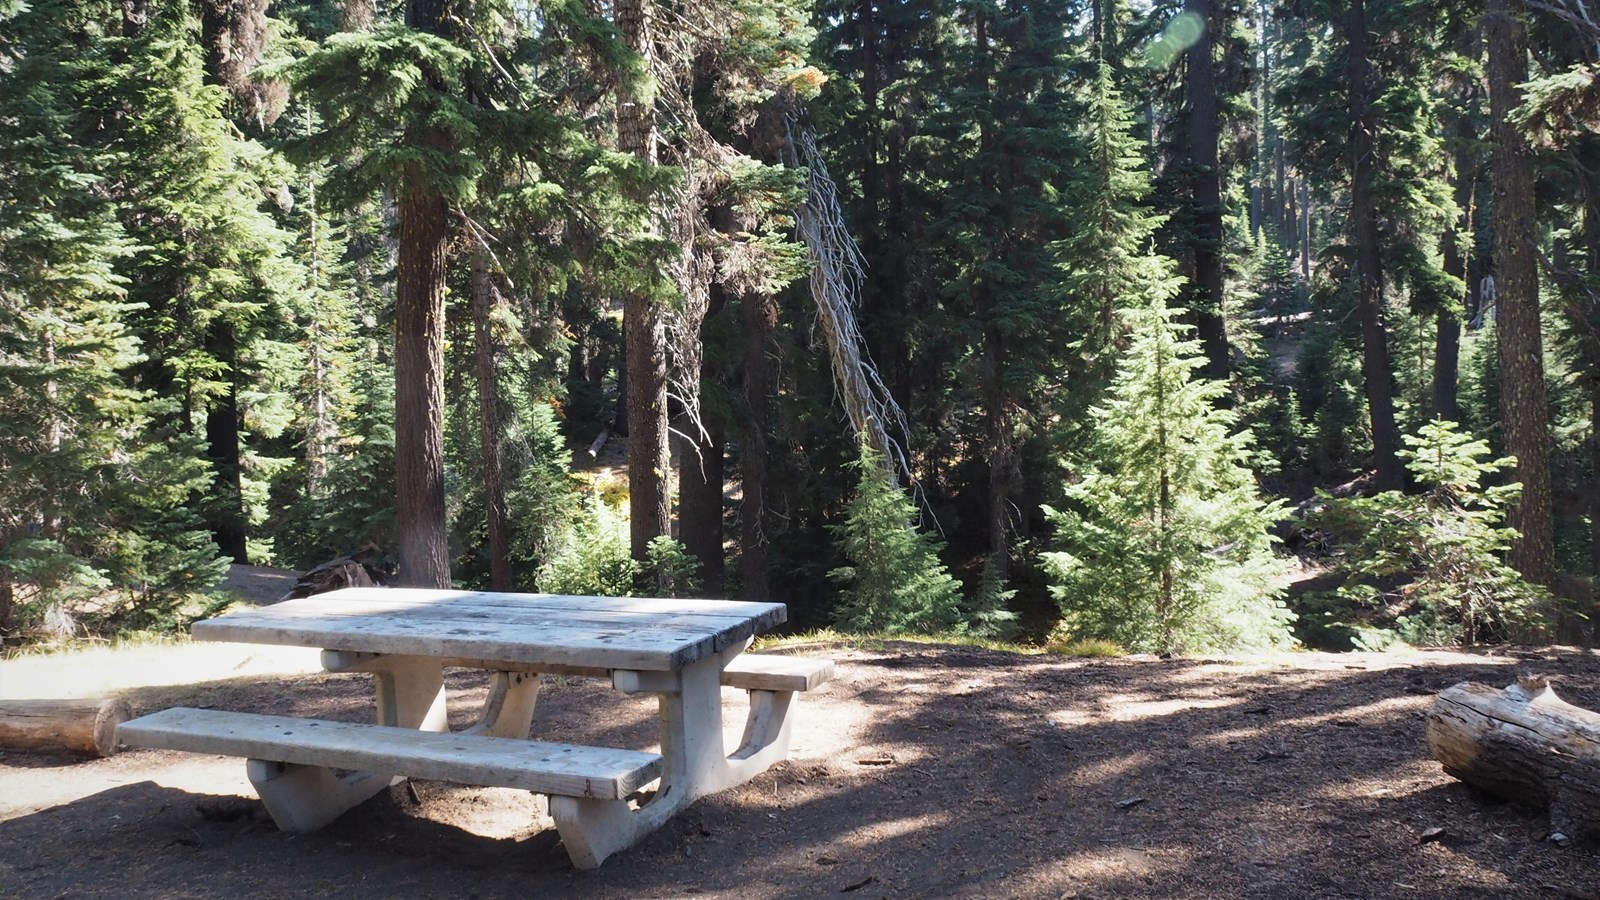 A concrete base picnic table with wood top and benches shadowed by a tall forest